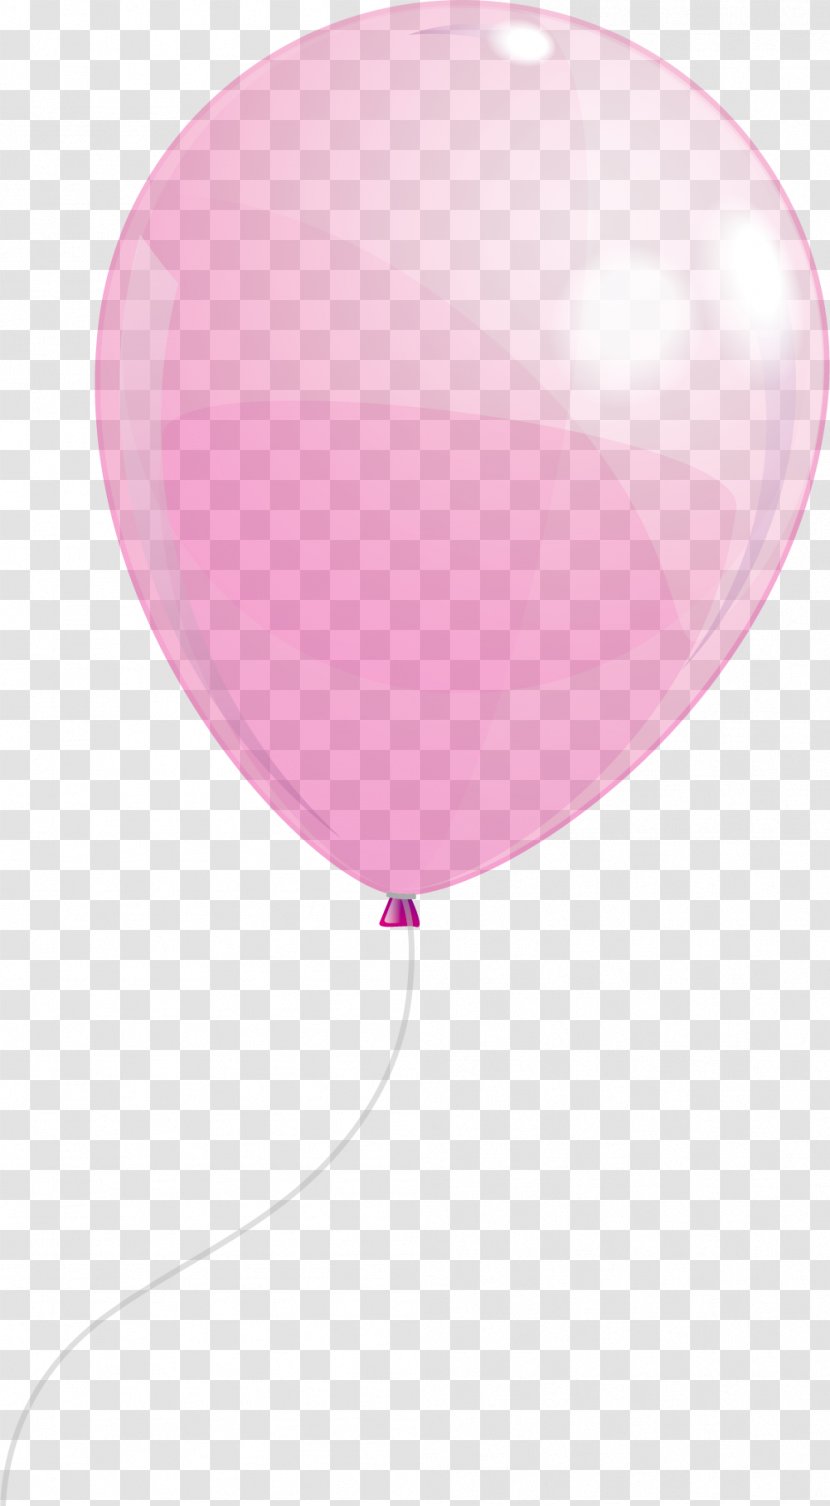 Balloon Pink - Heart - Hand Painted Transparent PNG